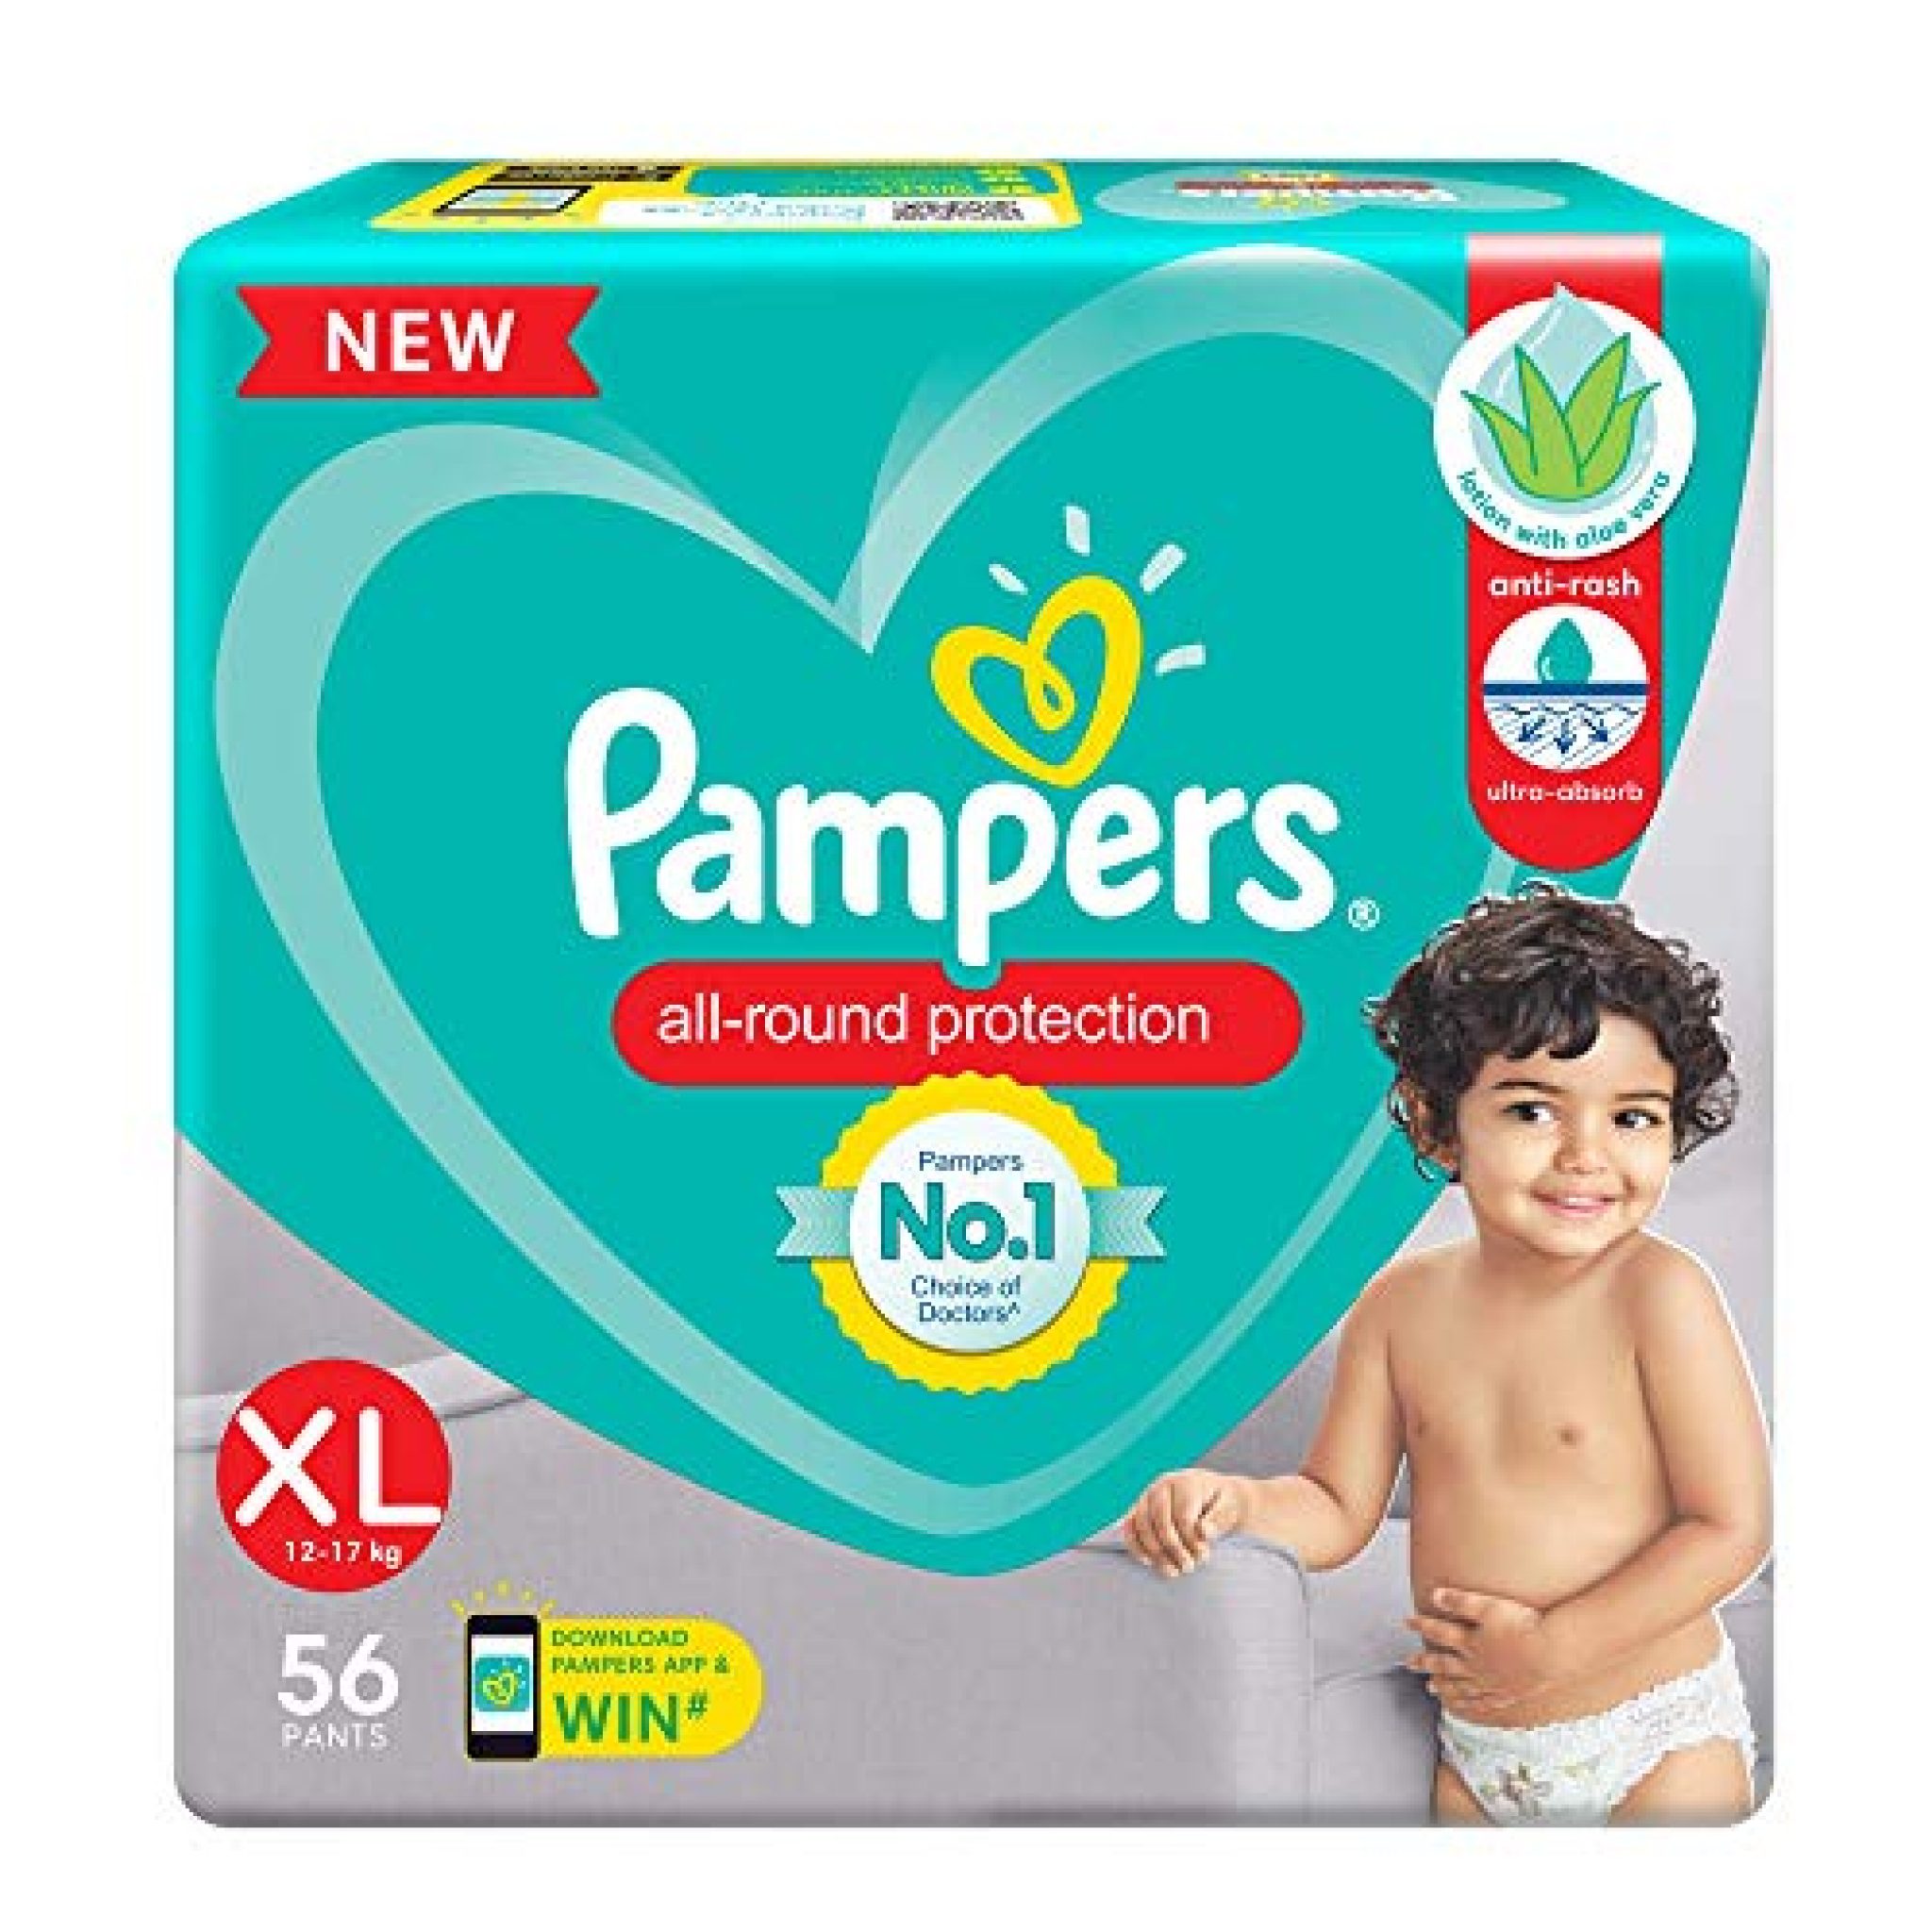 pampers-all-round-protection-pants-extra-large-size-baby-diapers-xl-56-count-anti-rash